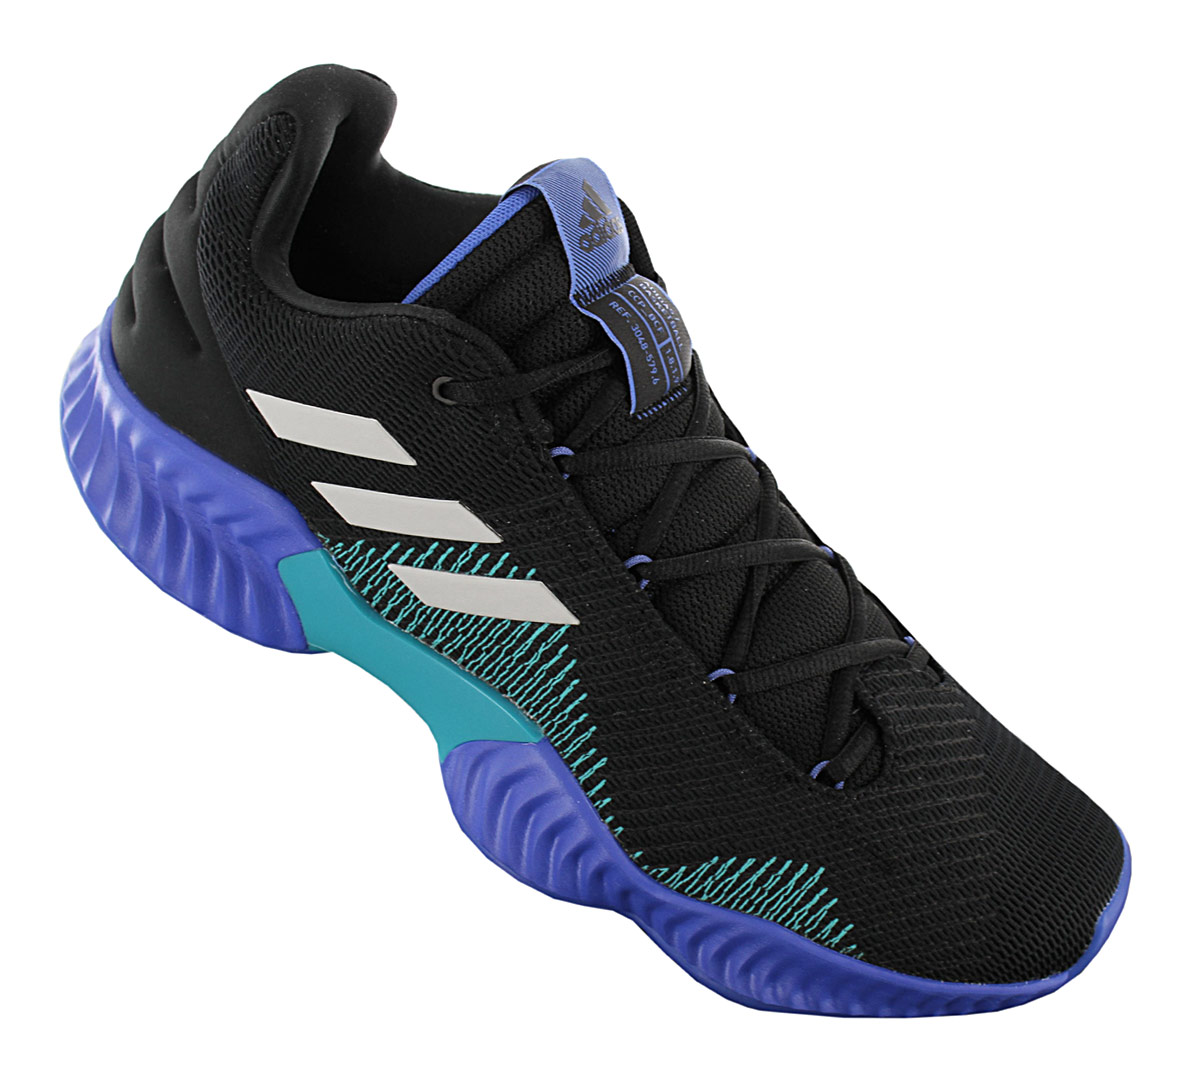 adidas pro bounce 2018 low shoes